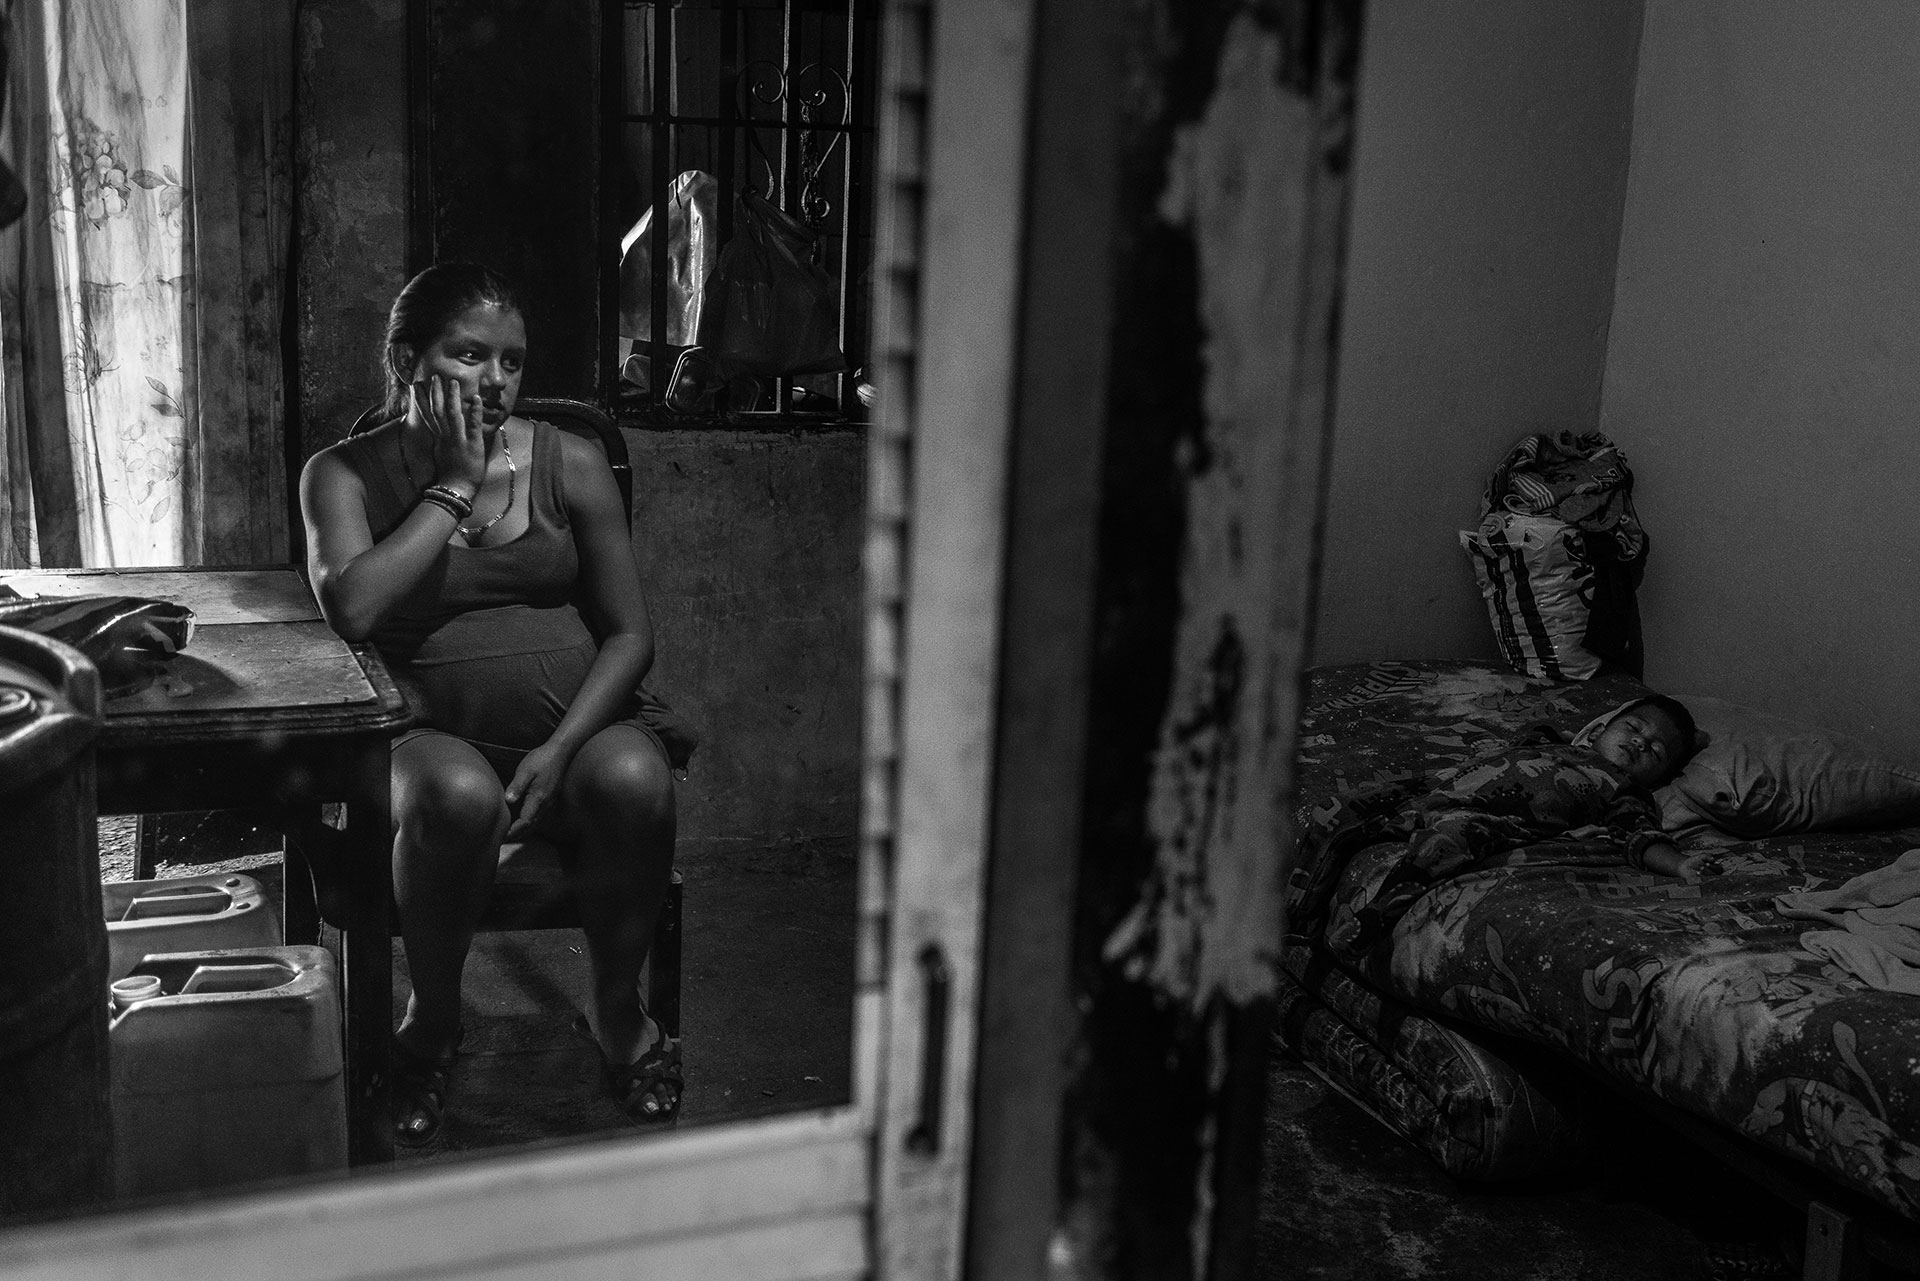 Roxana Gutiérrez, aged 19, looks after her son in her home in a poor neighbourhood of Caracas. Although both she and her husband Carlos, aged 20, have steady jobs, the crisis and shortages made it increasingly difficult to find food, which led Carlos to go out at night and steal motorbikes. He was captured by the police on his first attempt and is currently serving a sentence in jail. Roxana is pregnant with their second child.